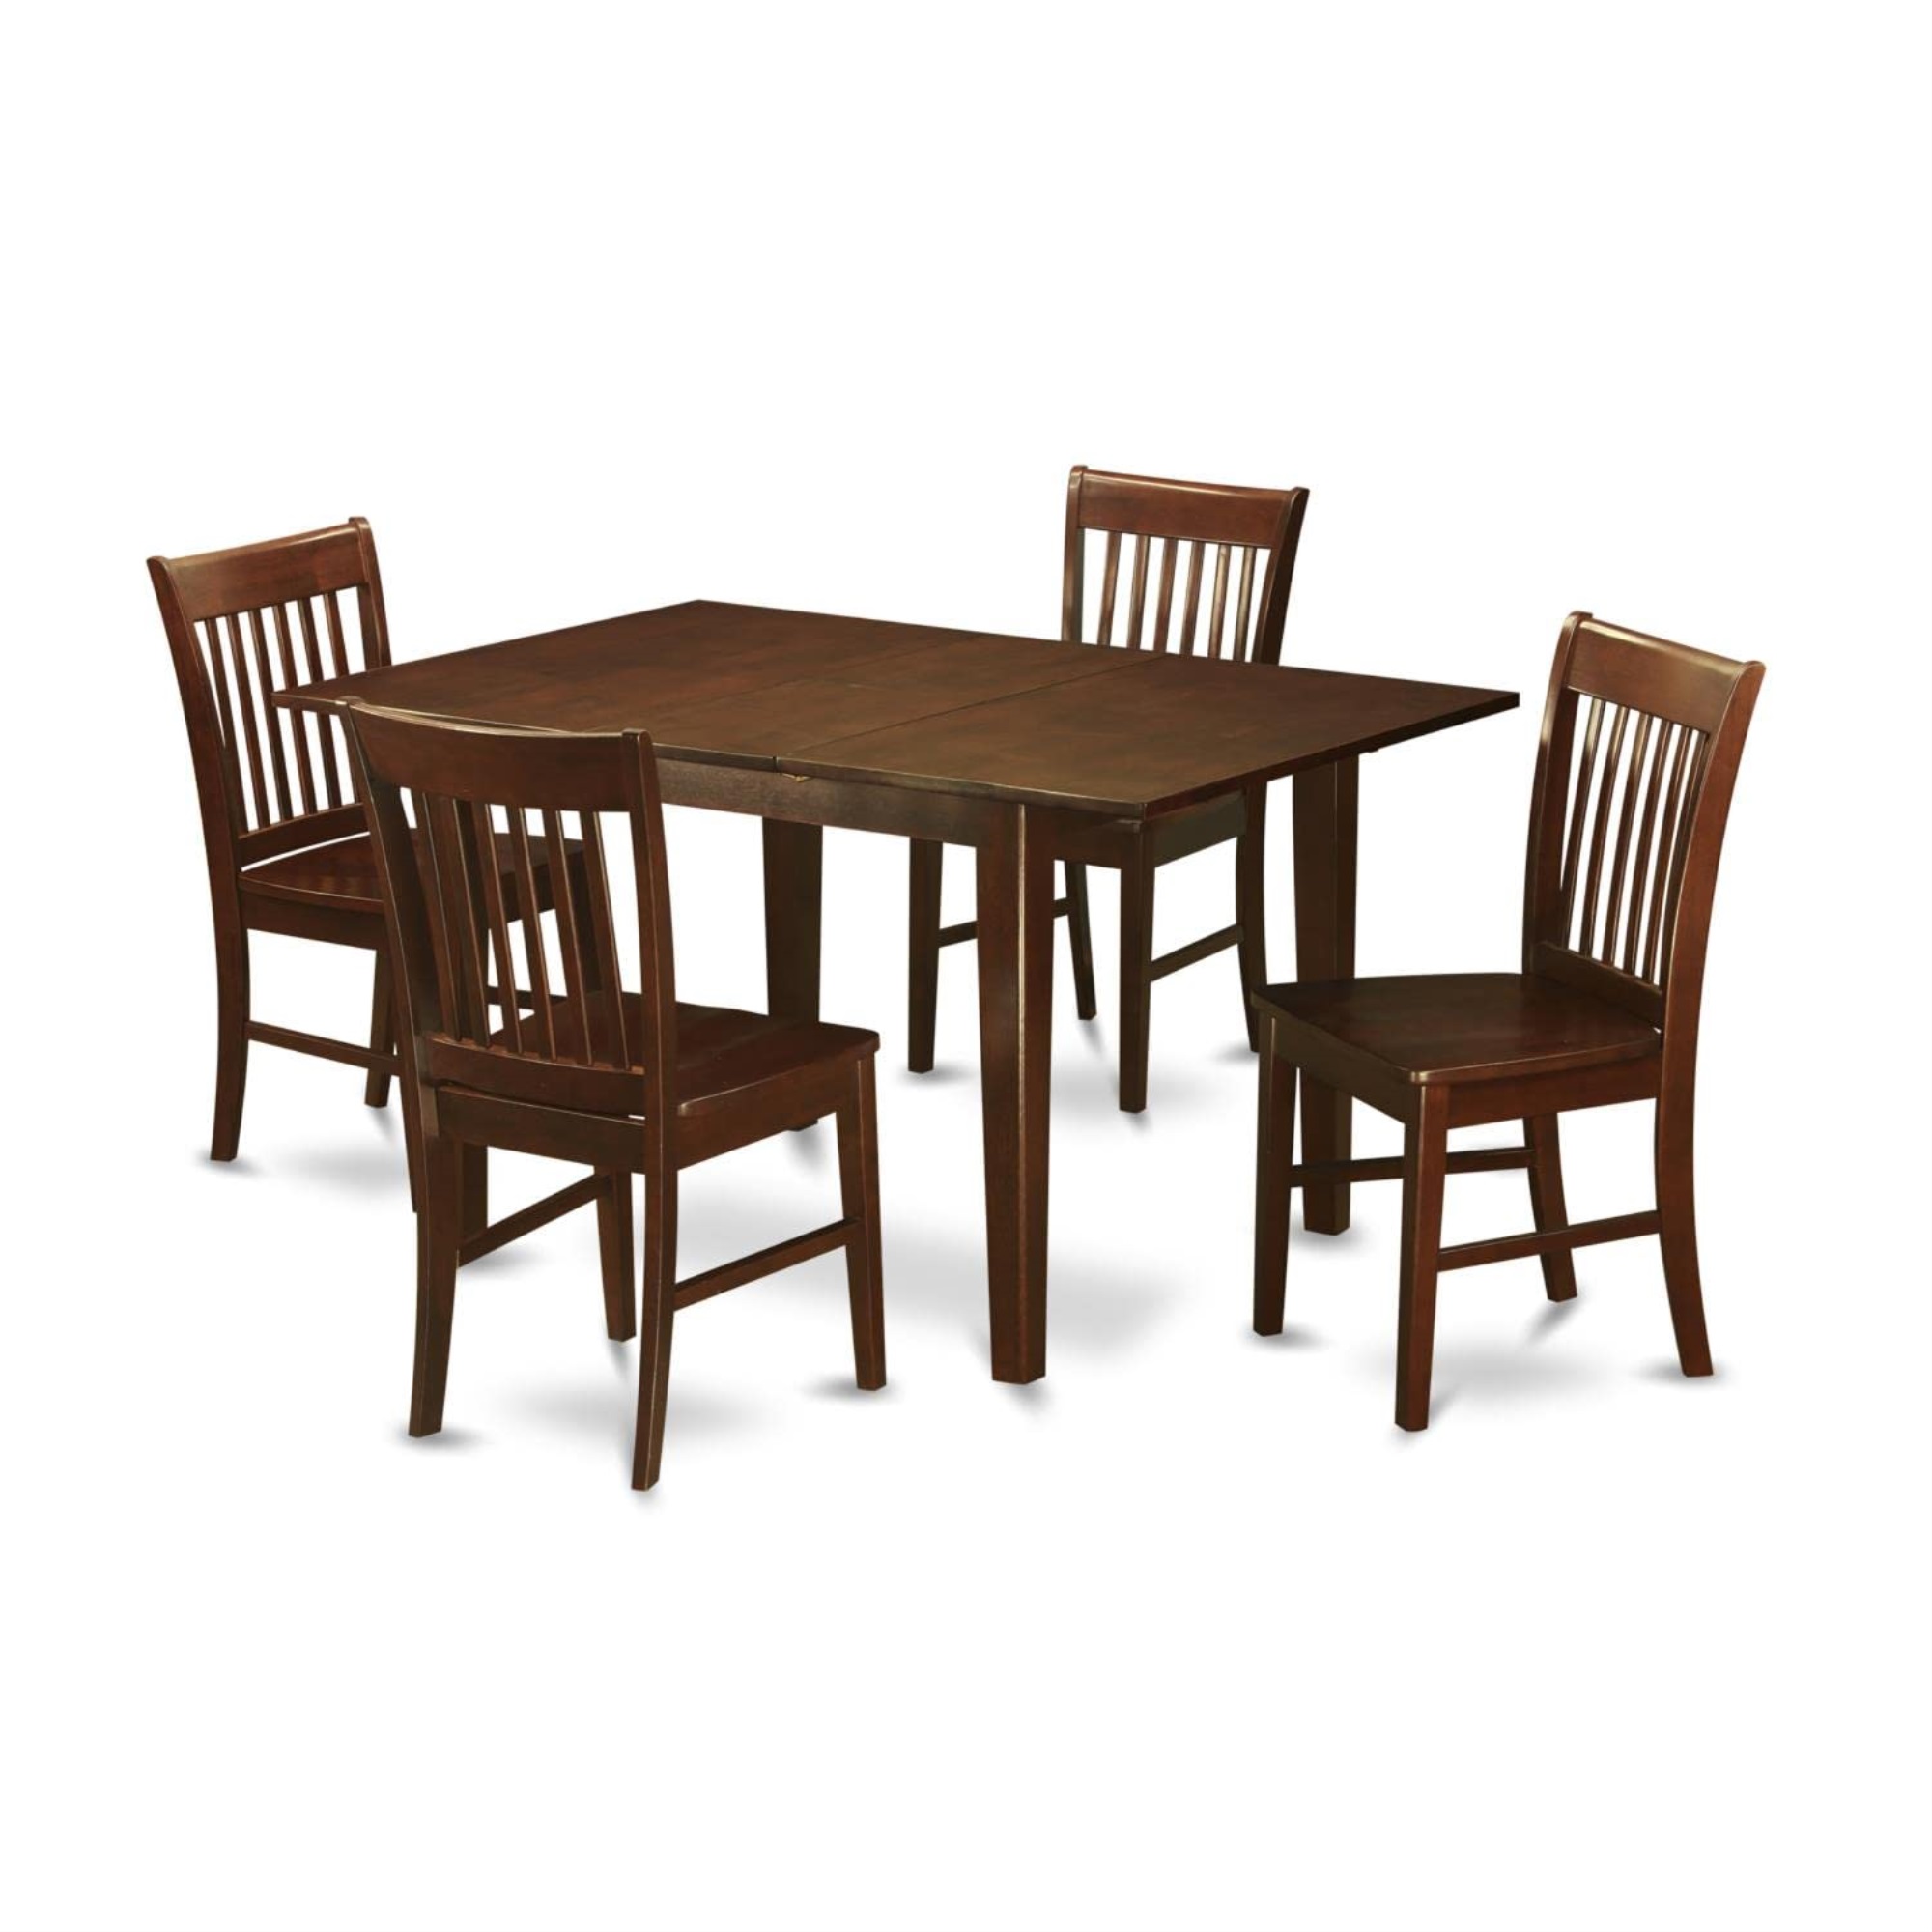 East West Furniture MLNO5-MAH-W 5 Pc Kitchen nook Dining set-breakfast nook and 4 Dining Chairs.